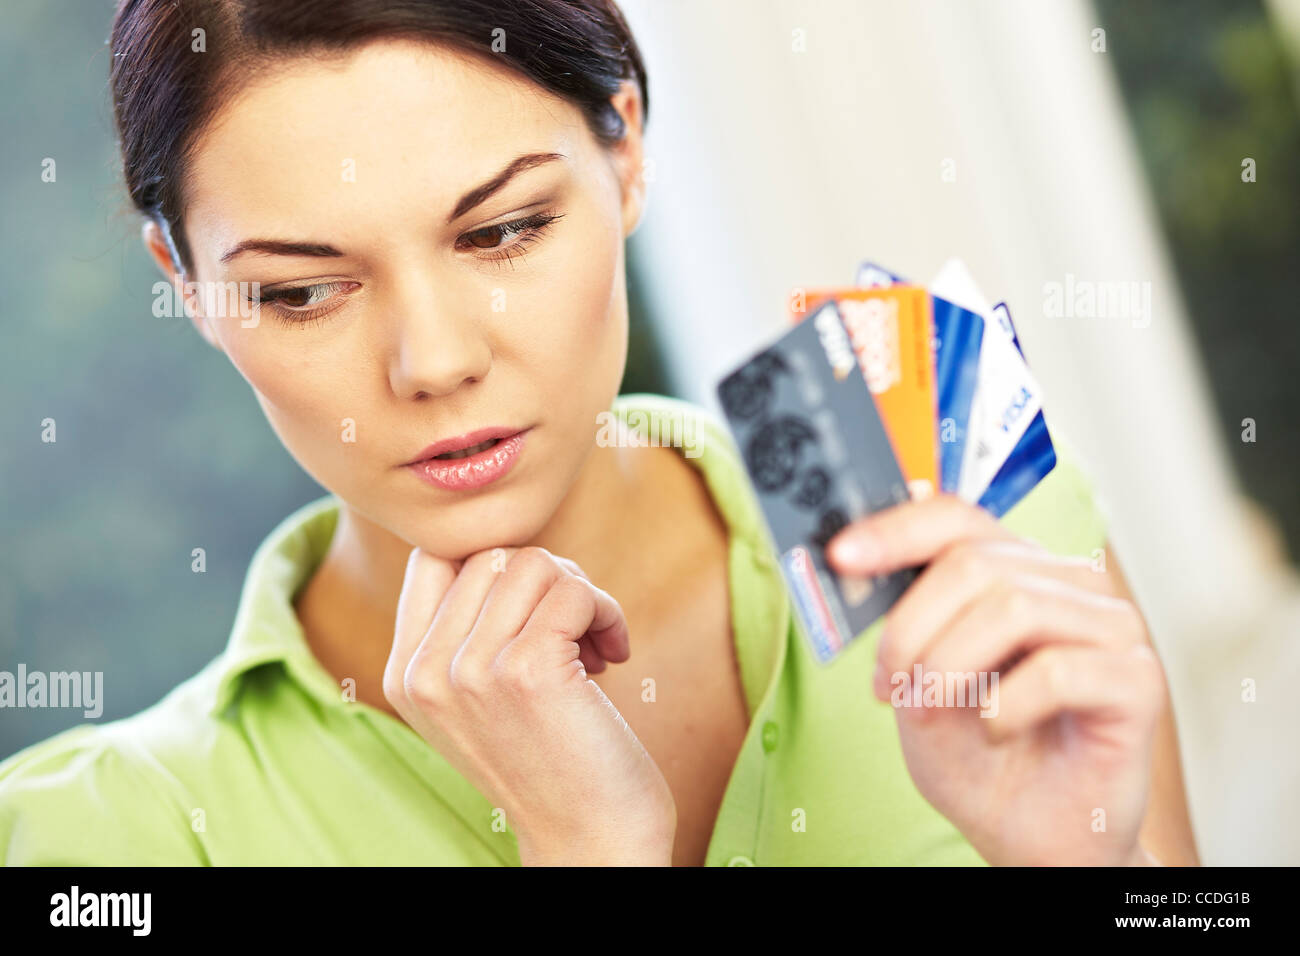 Woman holding credit cards Stock Photo